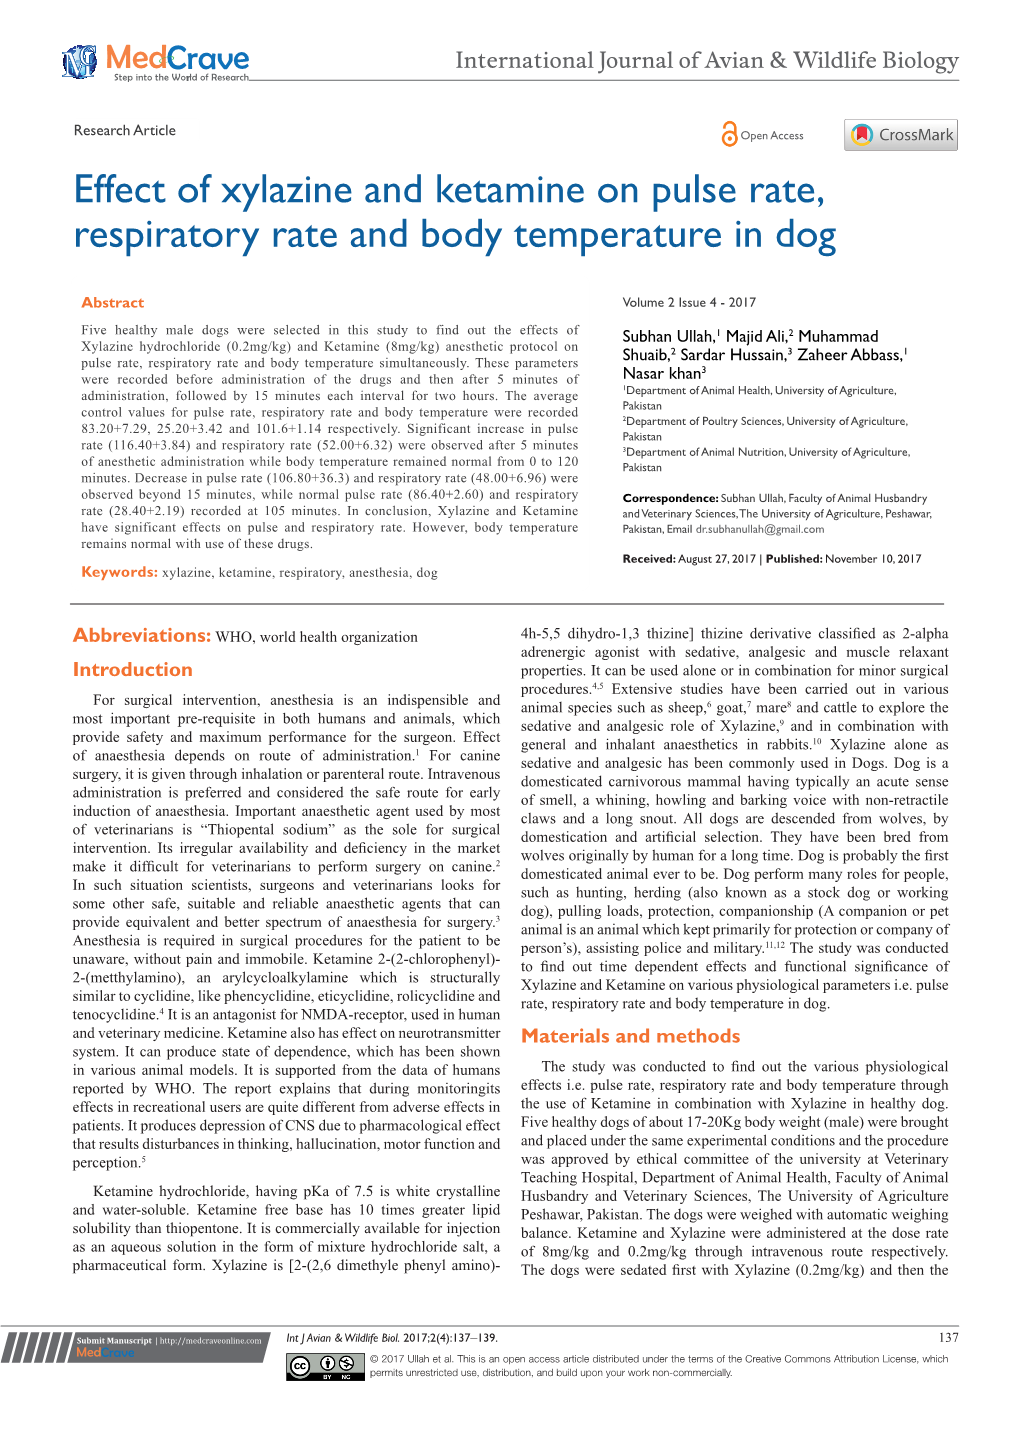 Effect of Xylazine and Ketamine on Pulse Rate, Respiratory Rate and Body Temperature in Dog